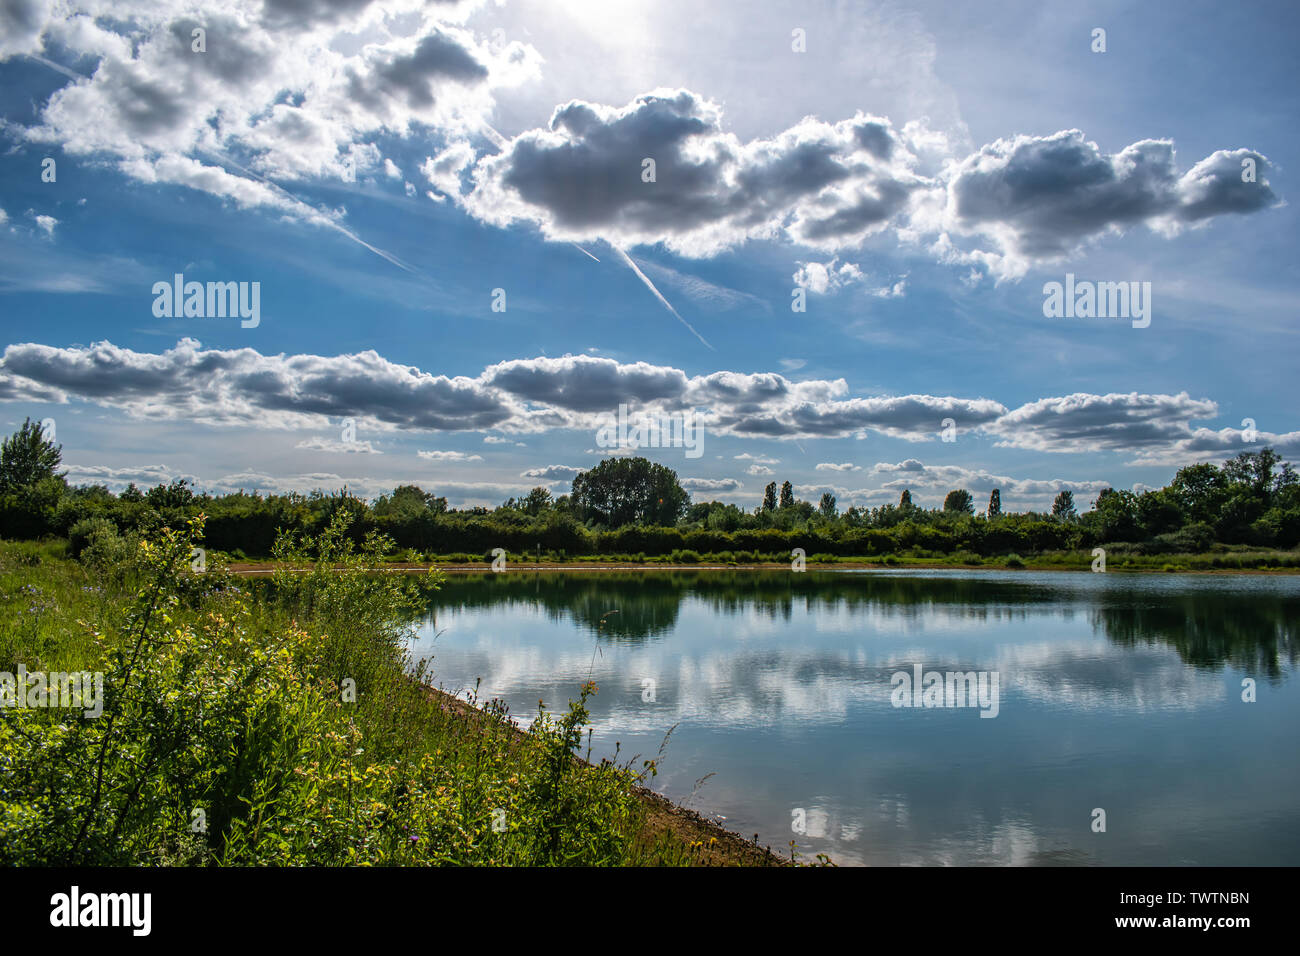 The cloudy sky above is reflected in the still waters of a lake below. Taken in Oxfordshire, England. Stock Photo